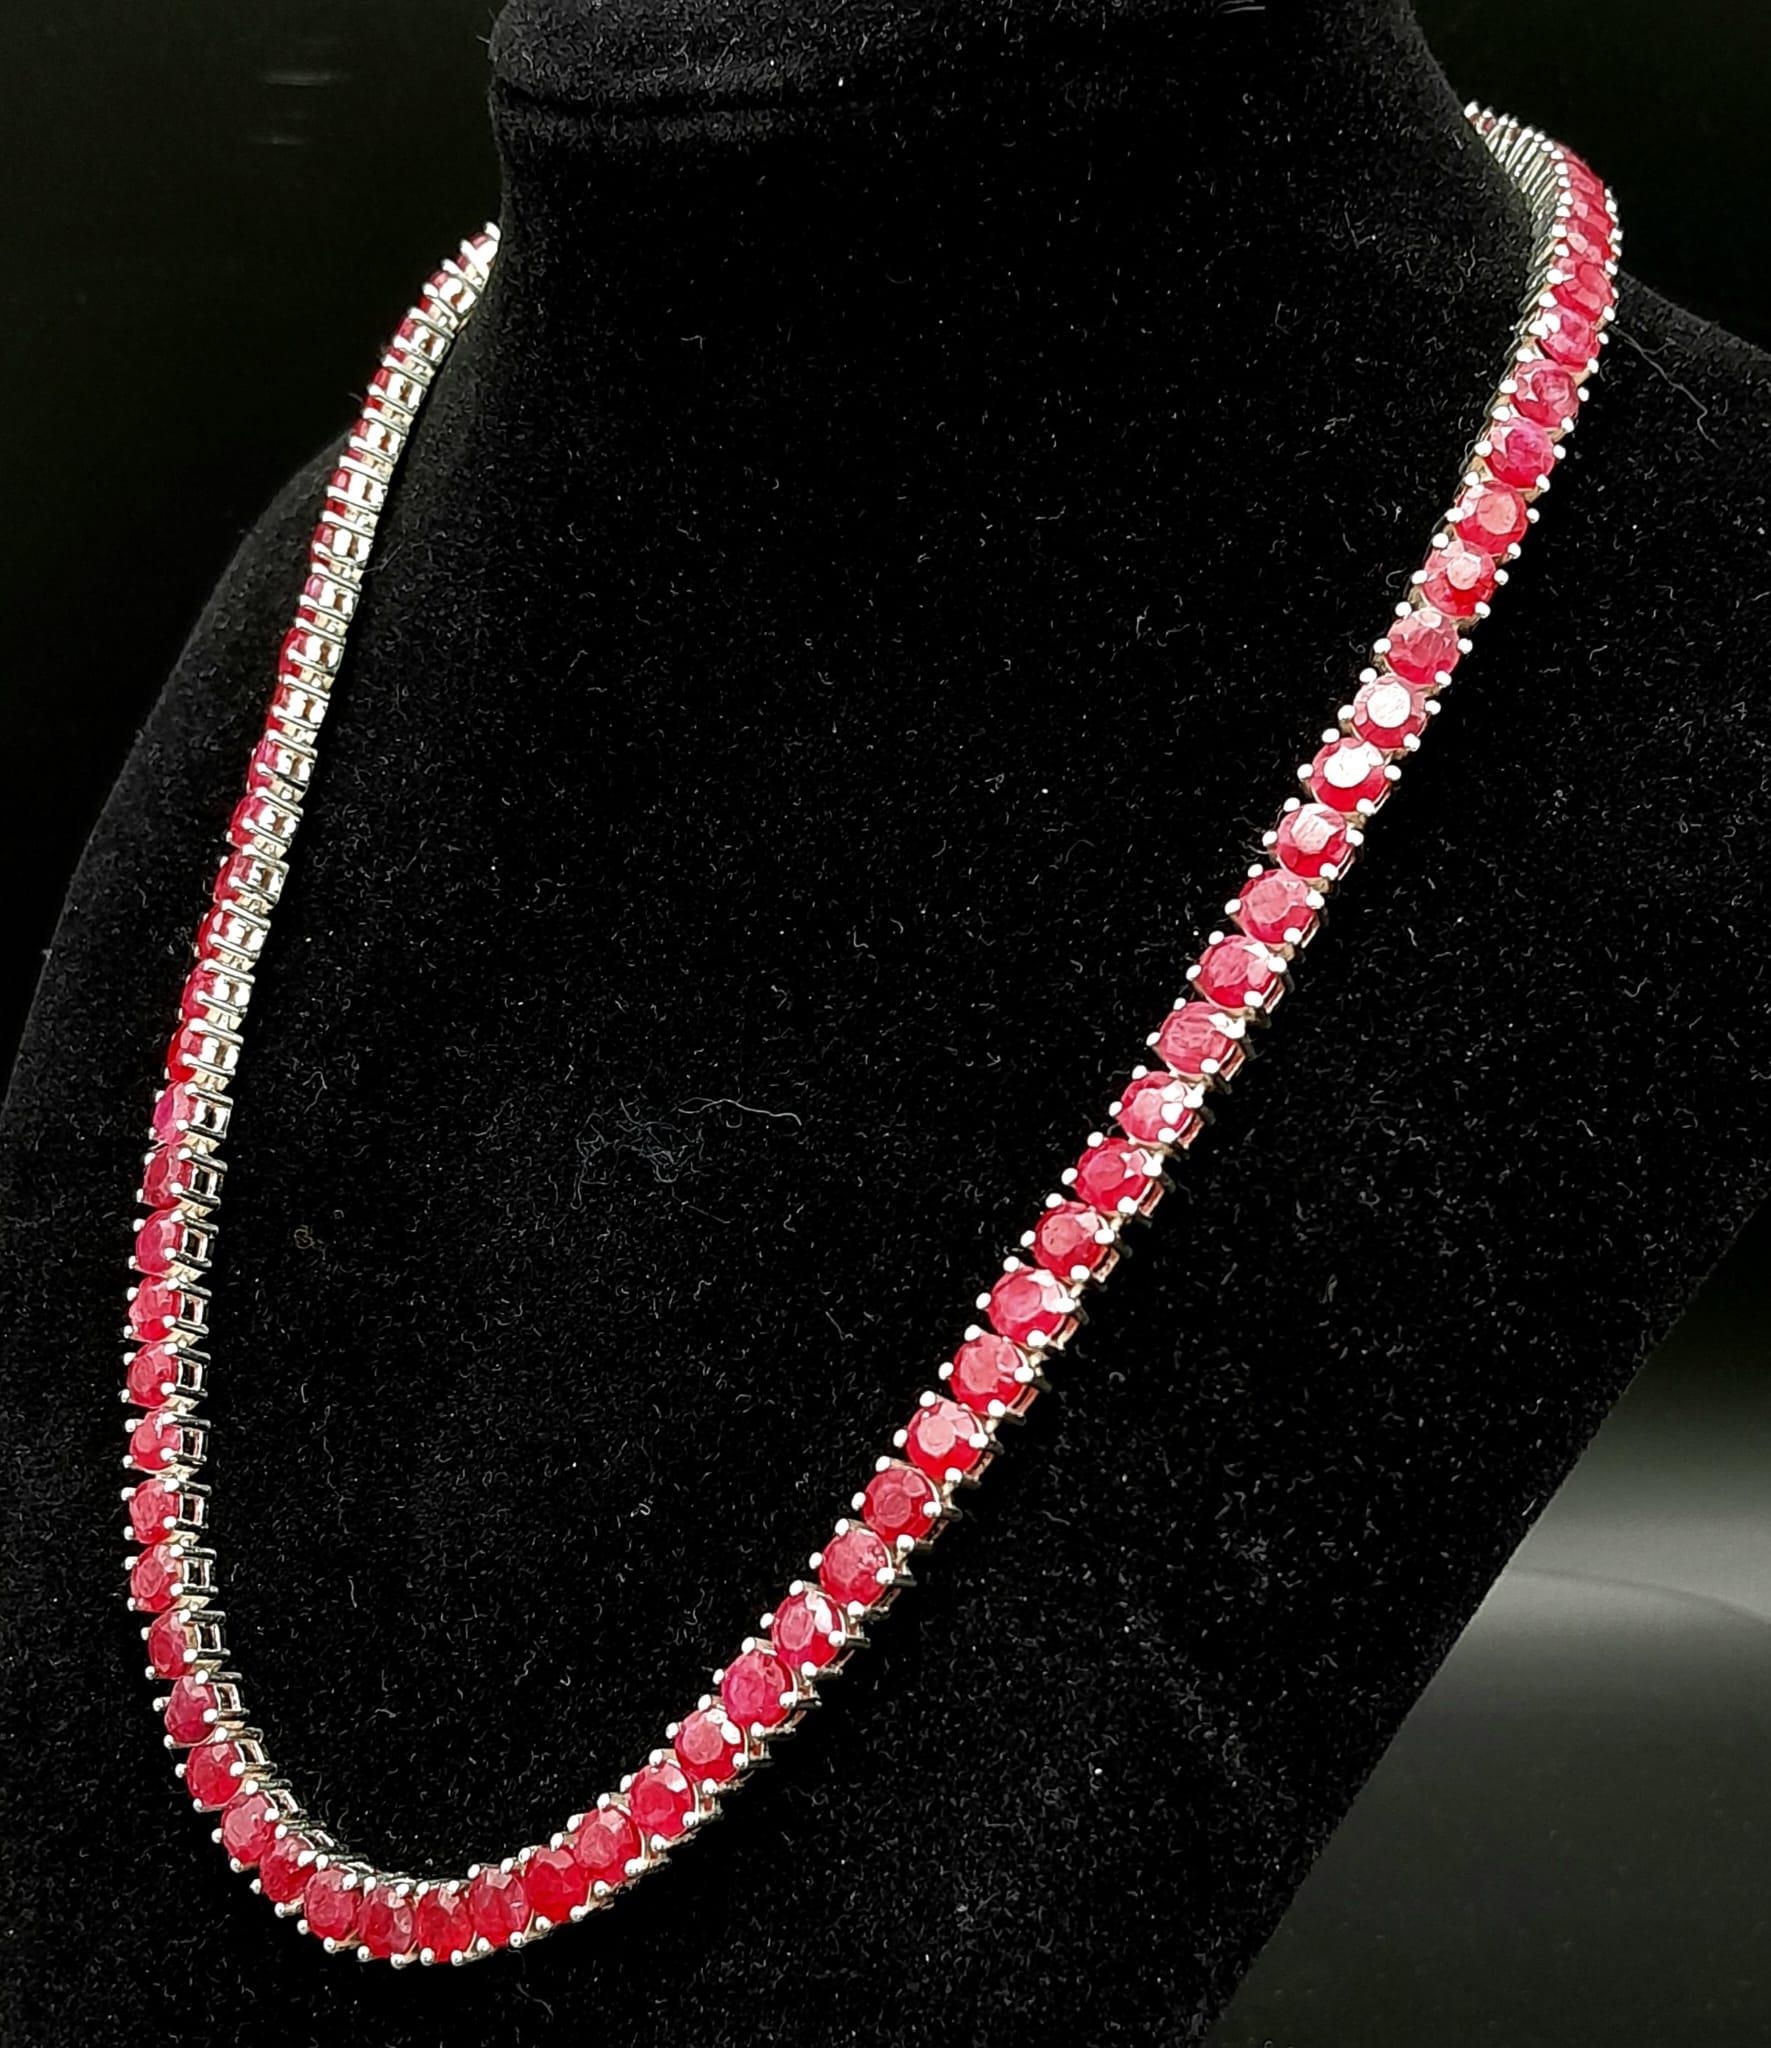 A Ruby Gemstone Tennis Necklace on 925 Silver. Approximately 45cm in length, 43g total weight. - Image 4 of 5